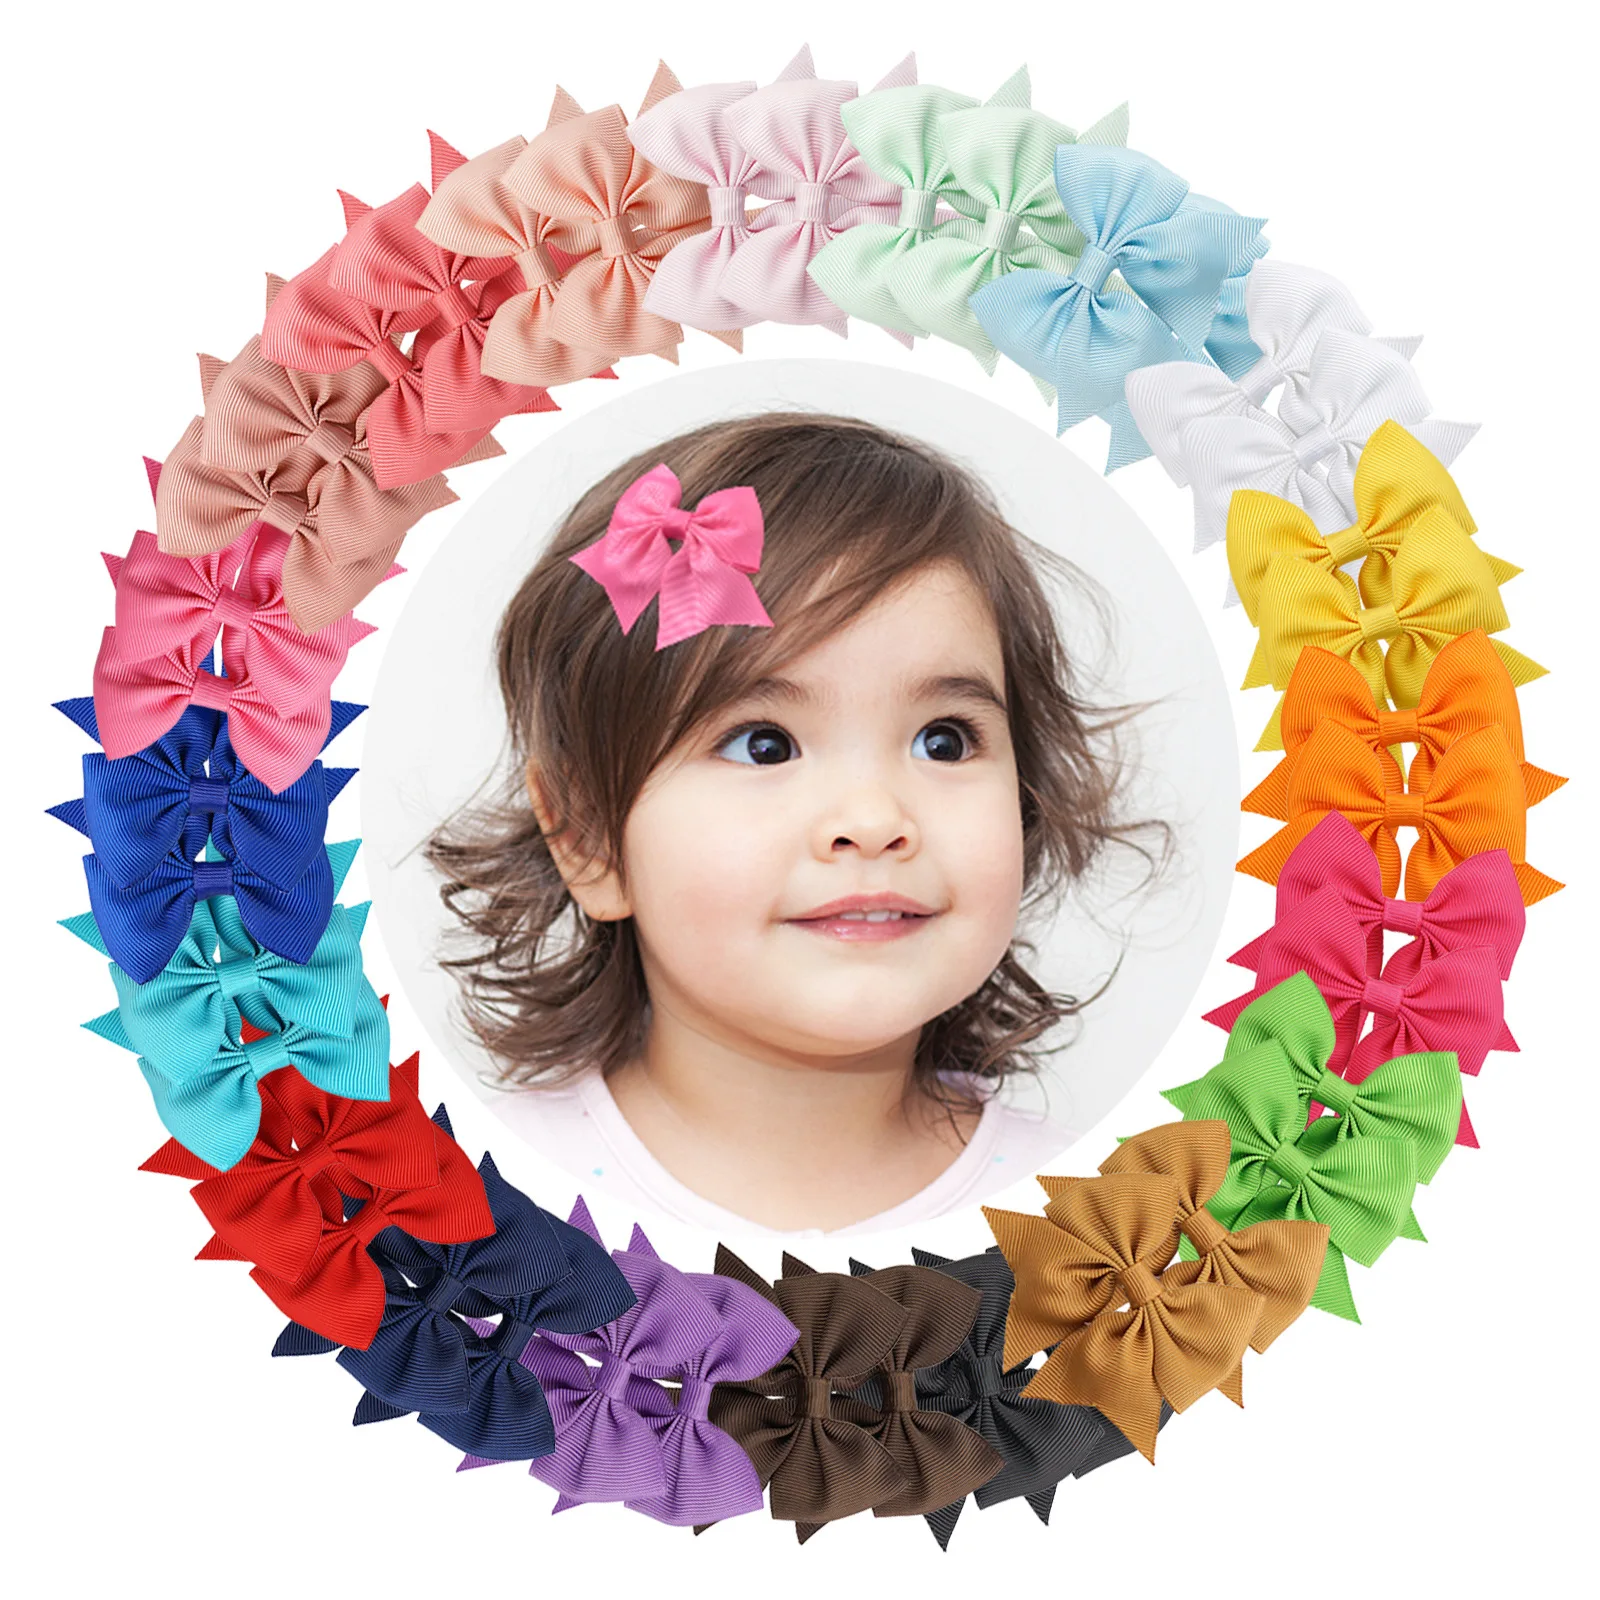 

40 Pcs Baby Girls Hair Bows in Pairs 3.5'' Ribbon Bows Alligator Hair Clips Barrettes for Infants Toddlers Girls Kids